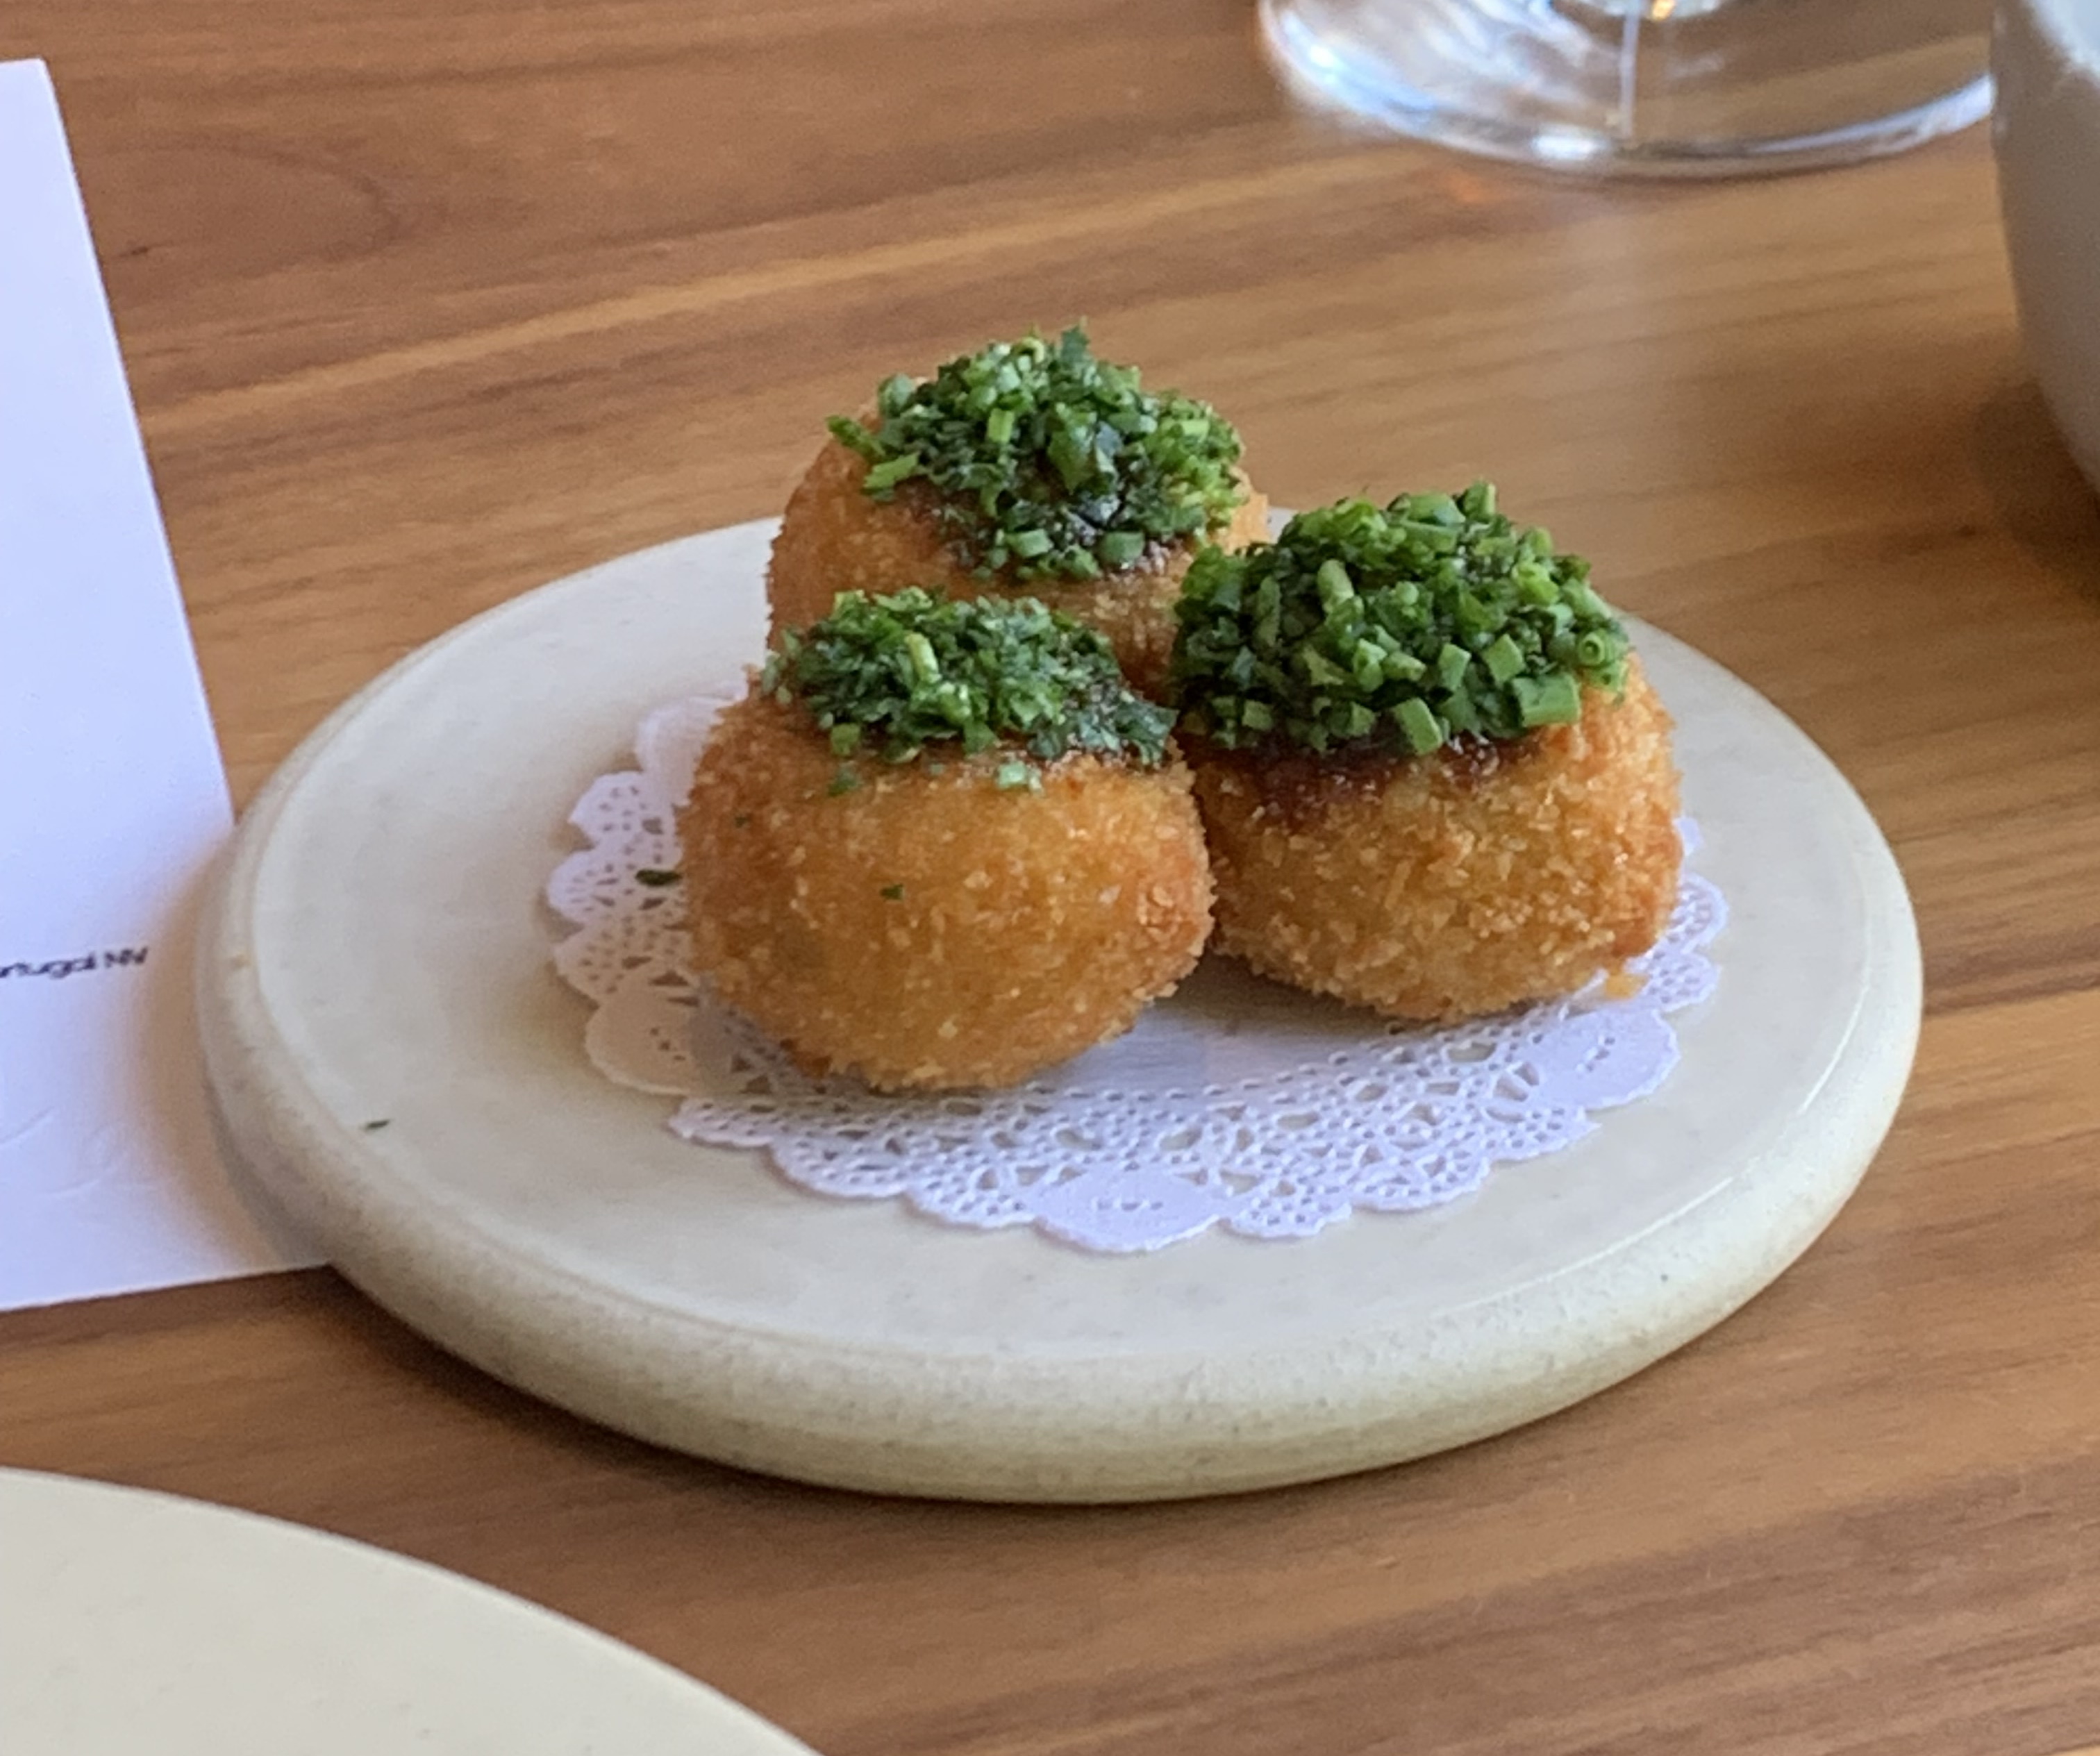 Three deep-fried balls, with lots of parsley stuck to the top